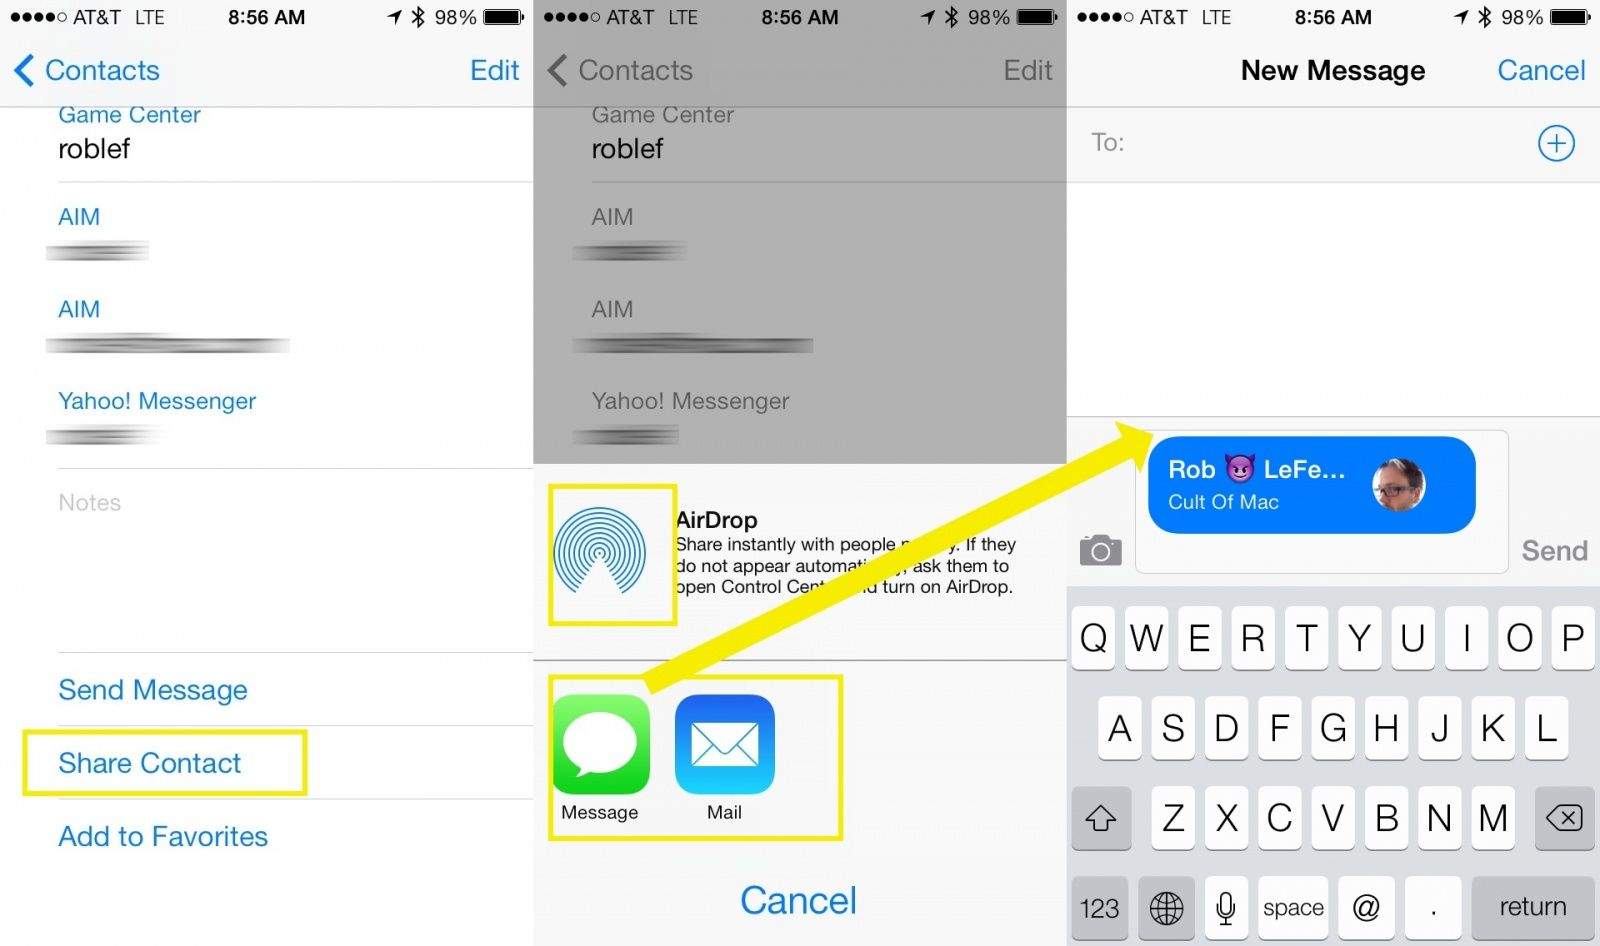 How To Share Contact Info From Your iOS 7 Device [iOS Tips ...